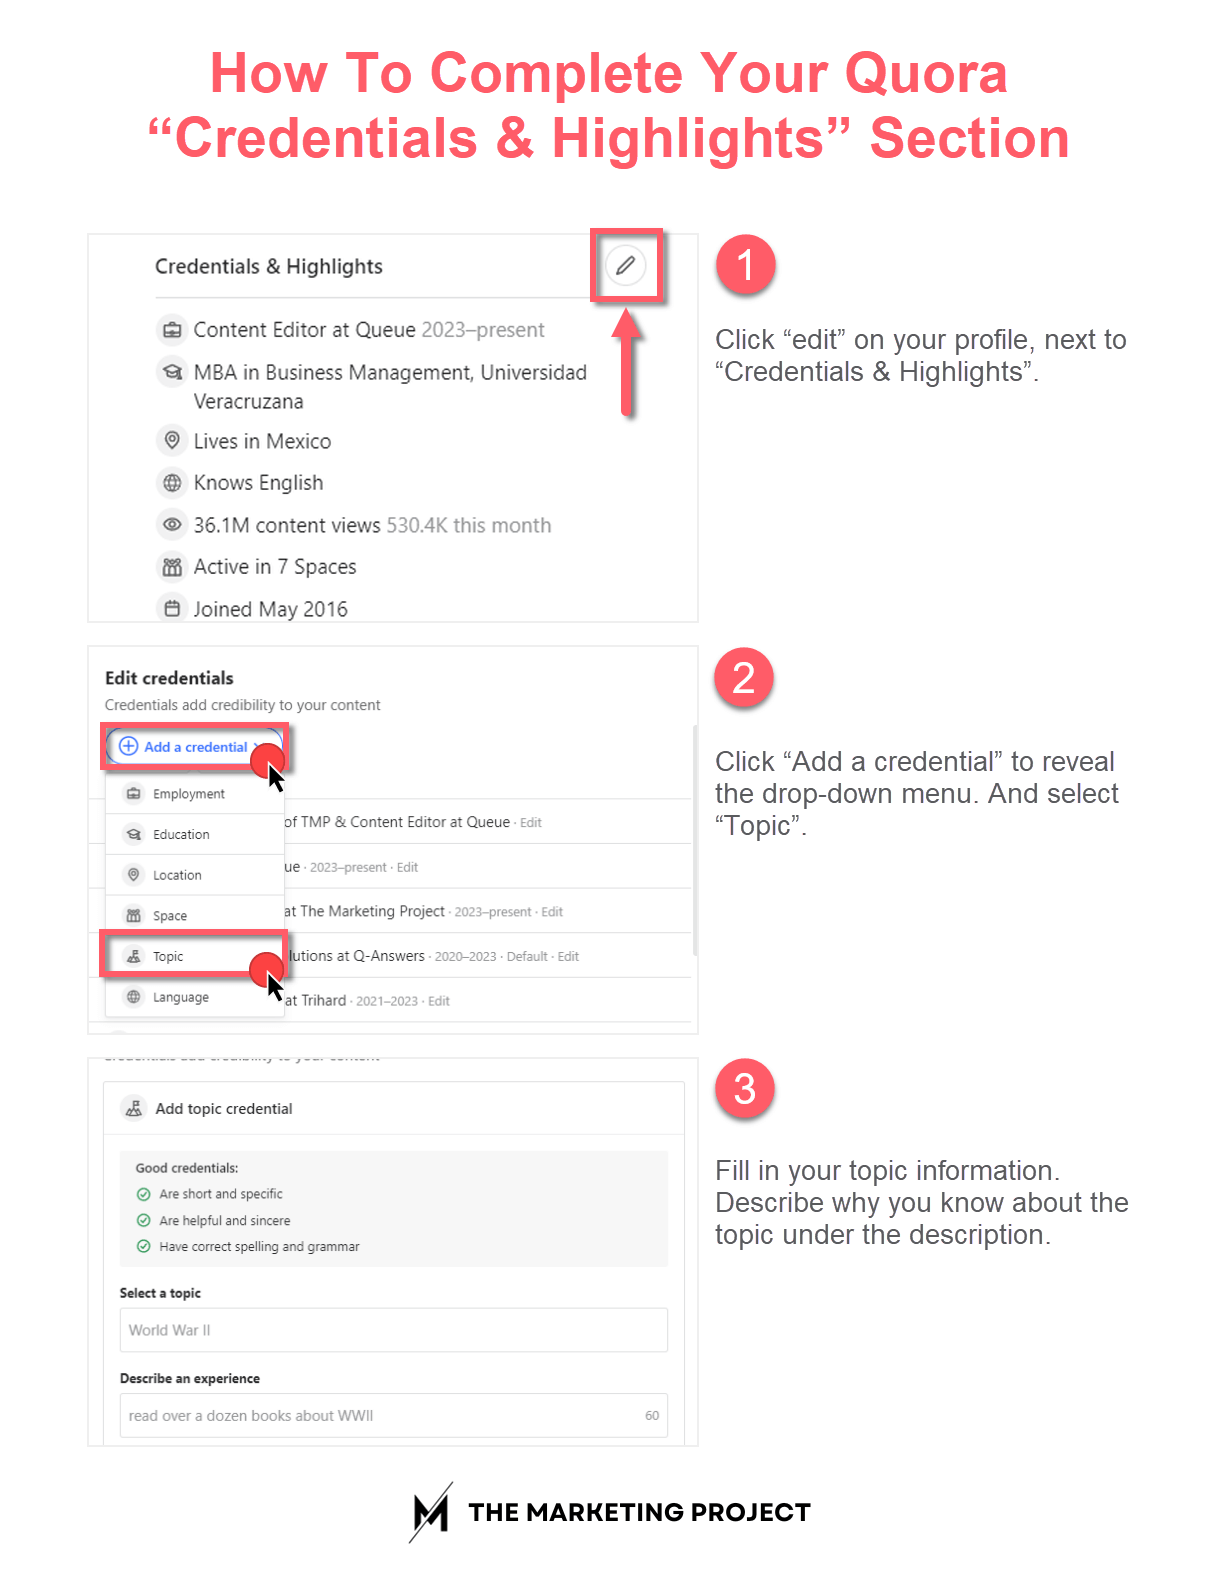 This image shows the step by step process to complete Quora's credentials and highlights section.